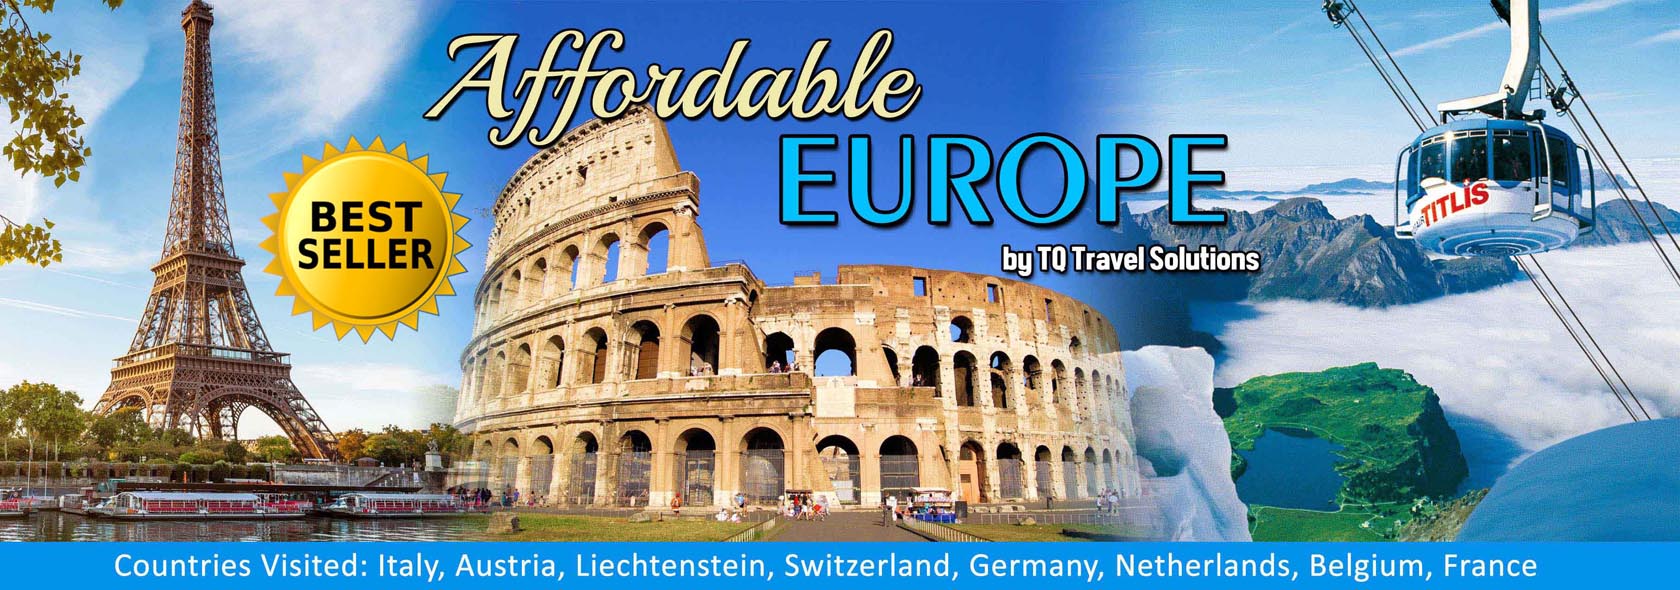 Tq Travel Solutions Affordable Europe Tour 2020 Best